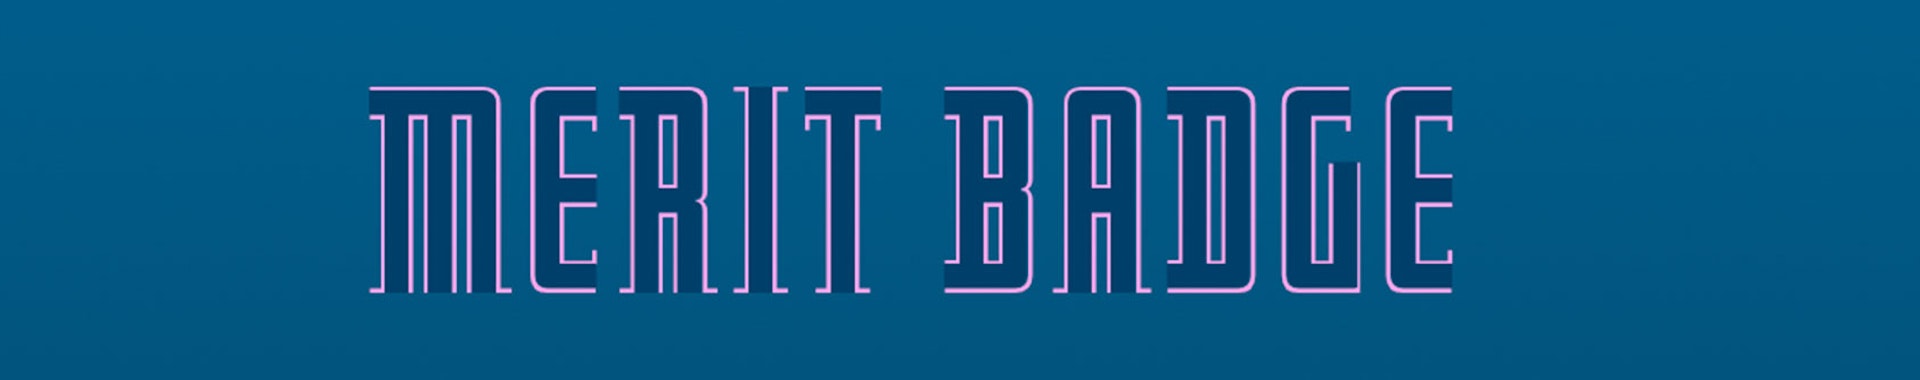 Font merit badge, blue color with light blue outline, has open ends like a pipe sitting on a gradient dark teal background